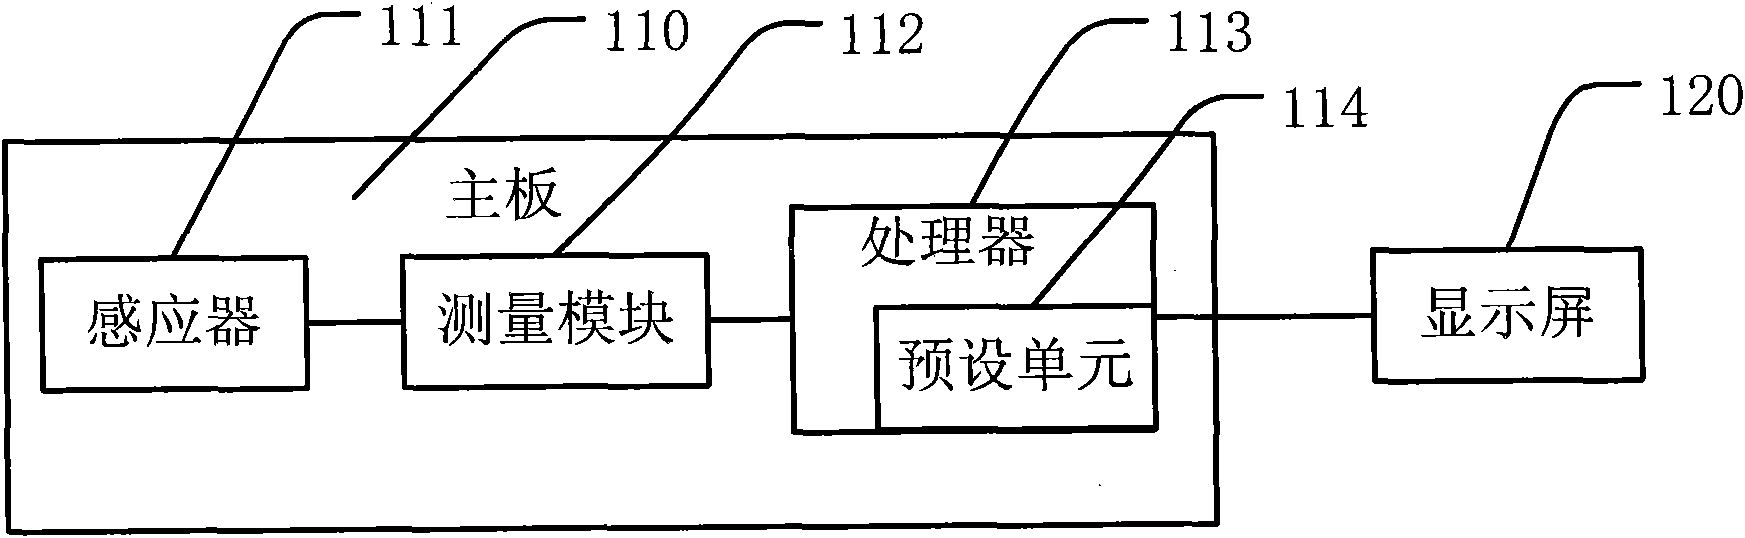 Mobile terminal and method for automatically regulating display size of characters